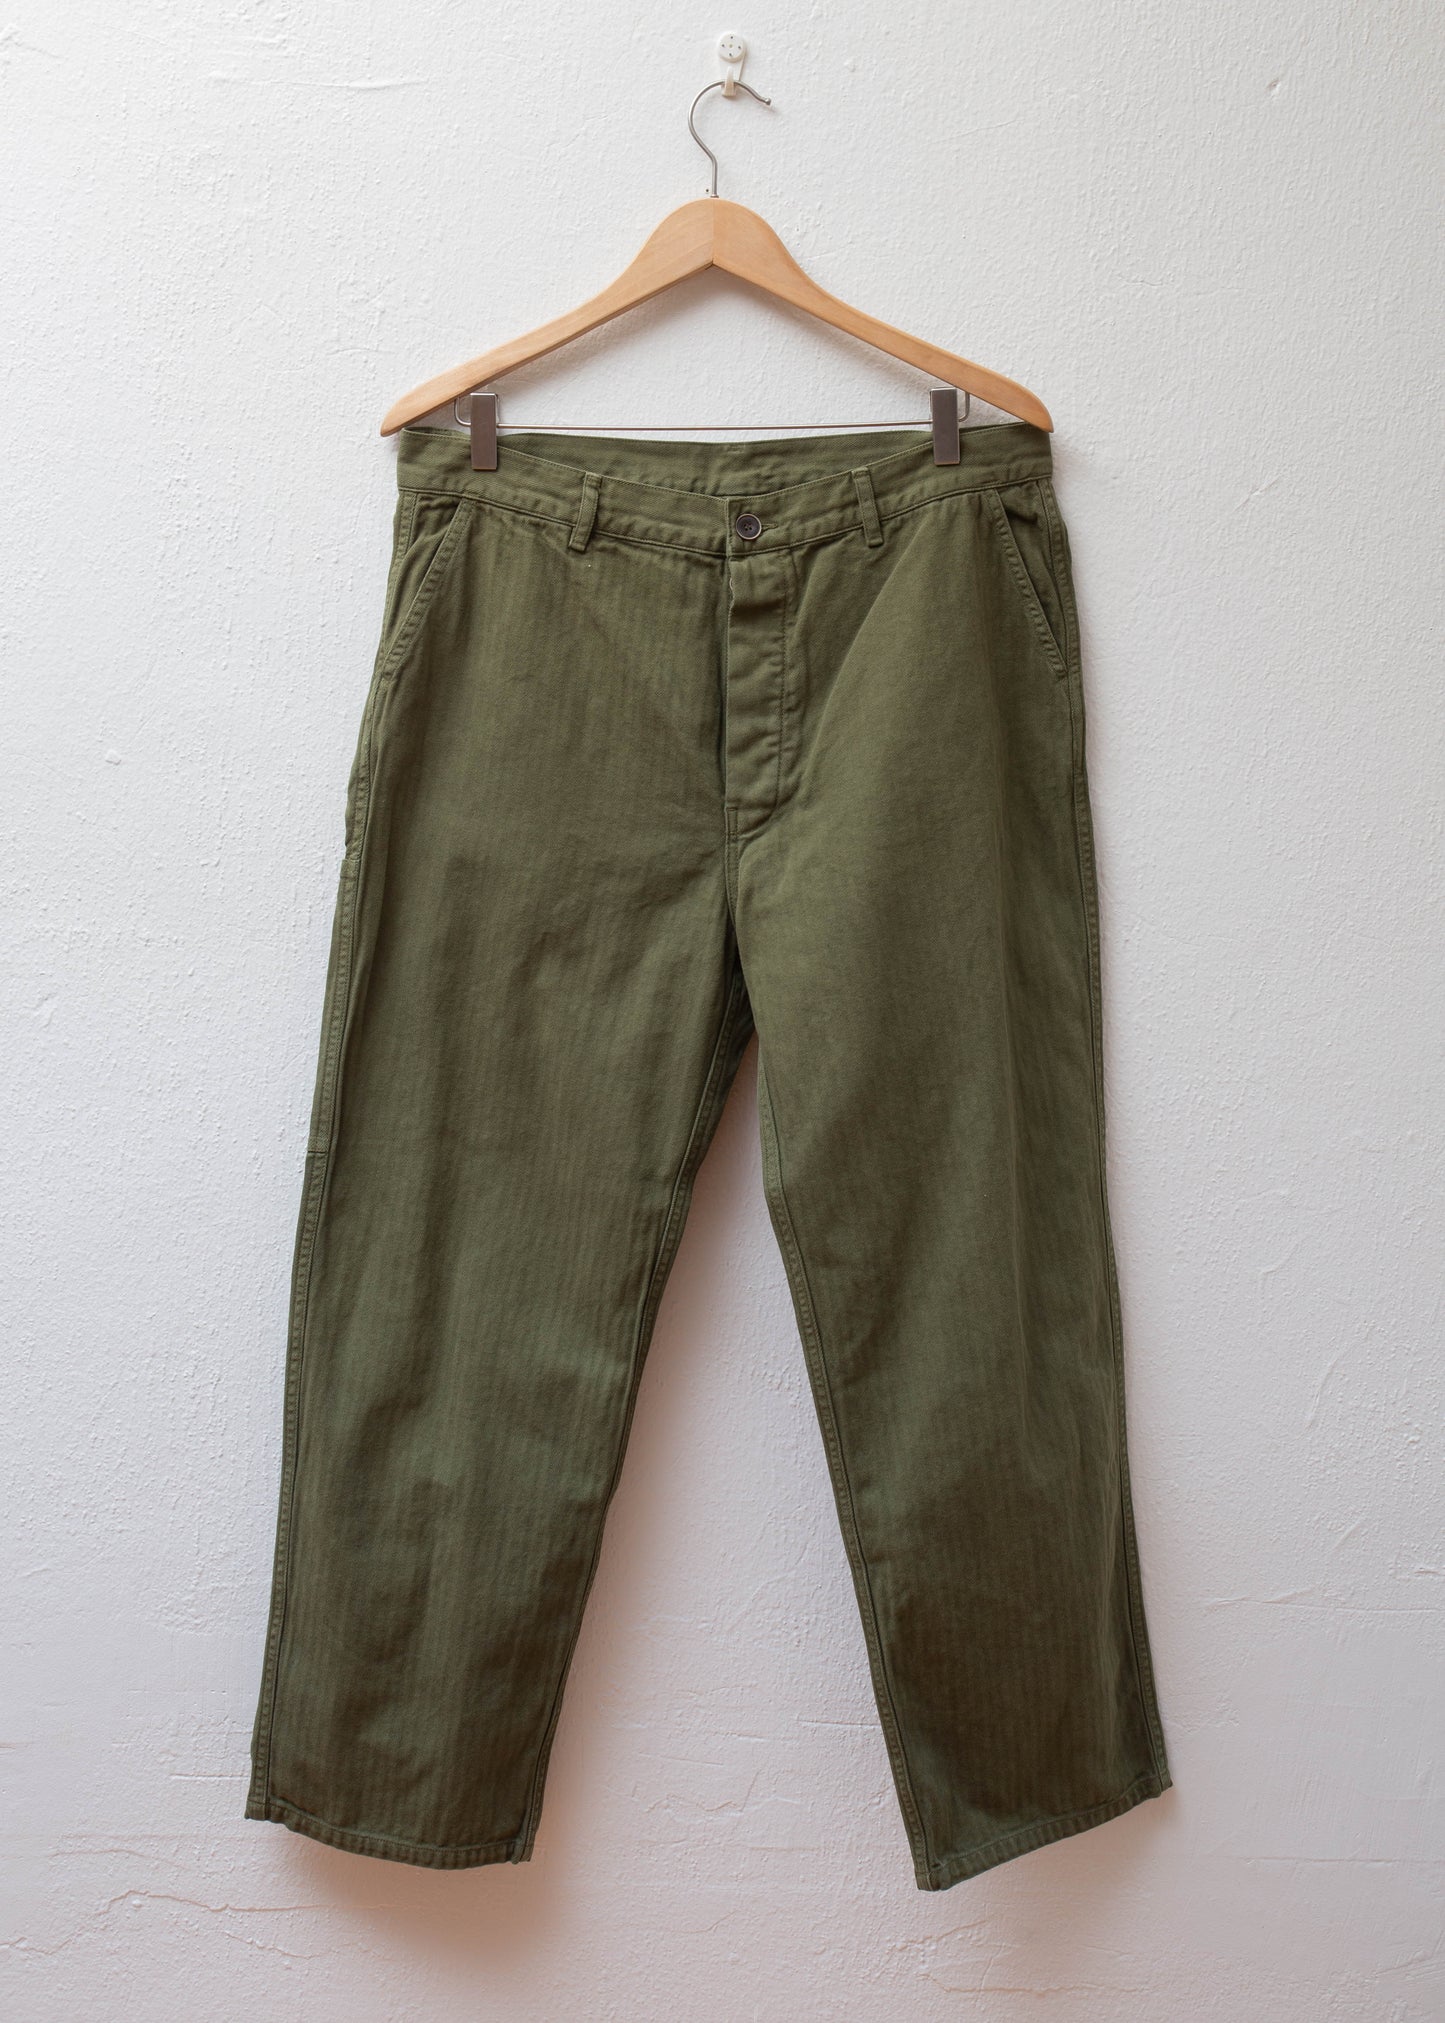 Herringbone Over Dye Pants color Olive hanging on white wall 